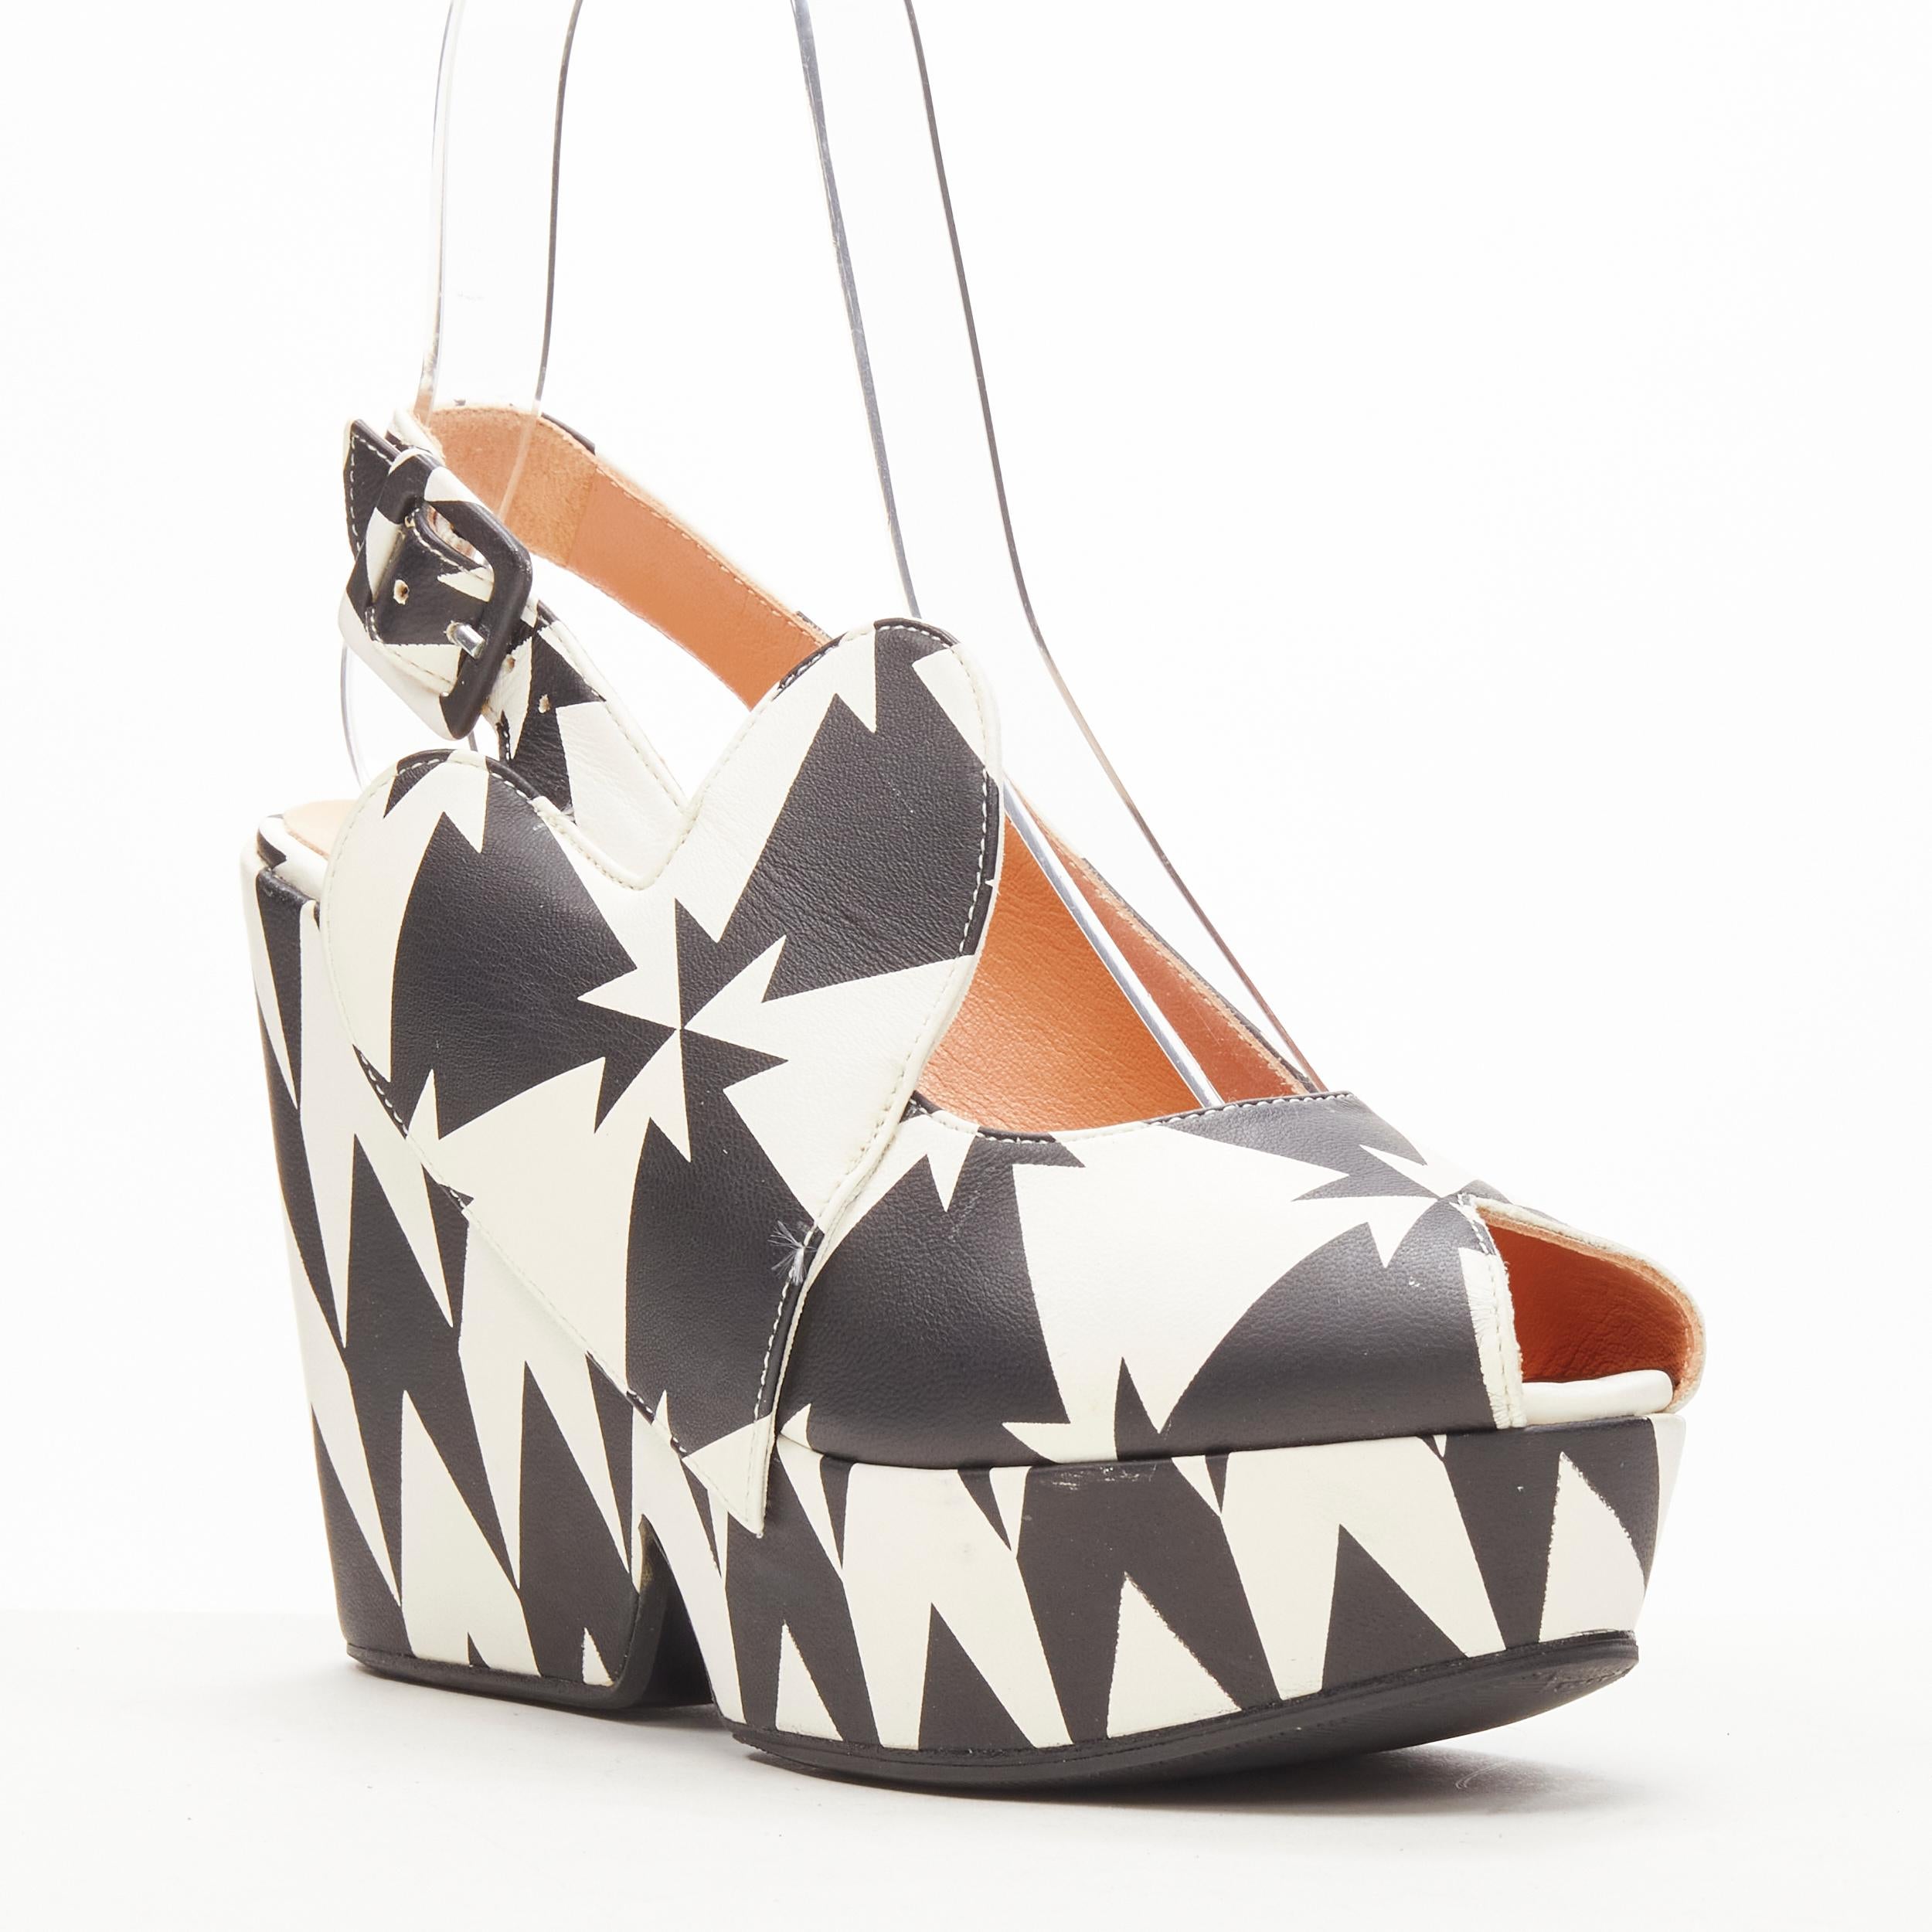 ROBERT CLERGERIE Louise Gray 2013 black white AGN graphic wedge heels EU37
Reference: ANWU/A00841
Brand: Robert Clergerie
Collection: 2013 Louise Gray
Material: Leather
Color: Black, White
Pattern: Houndstooth
Closure: Slingback
Lining: